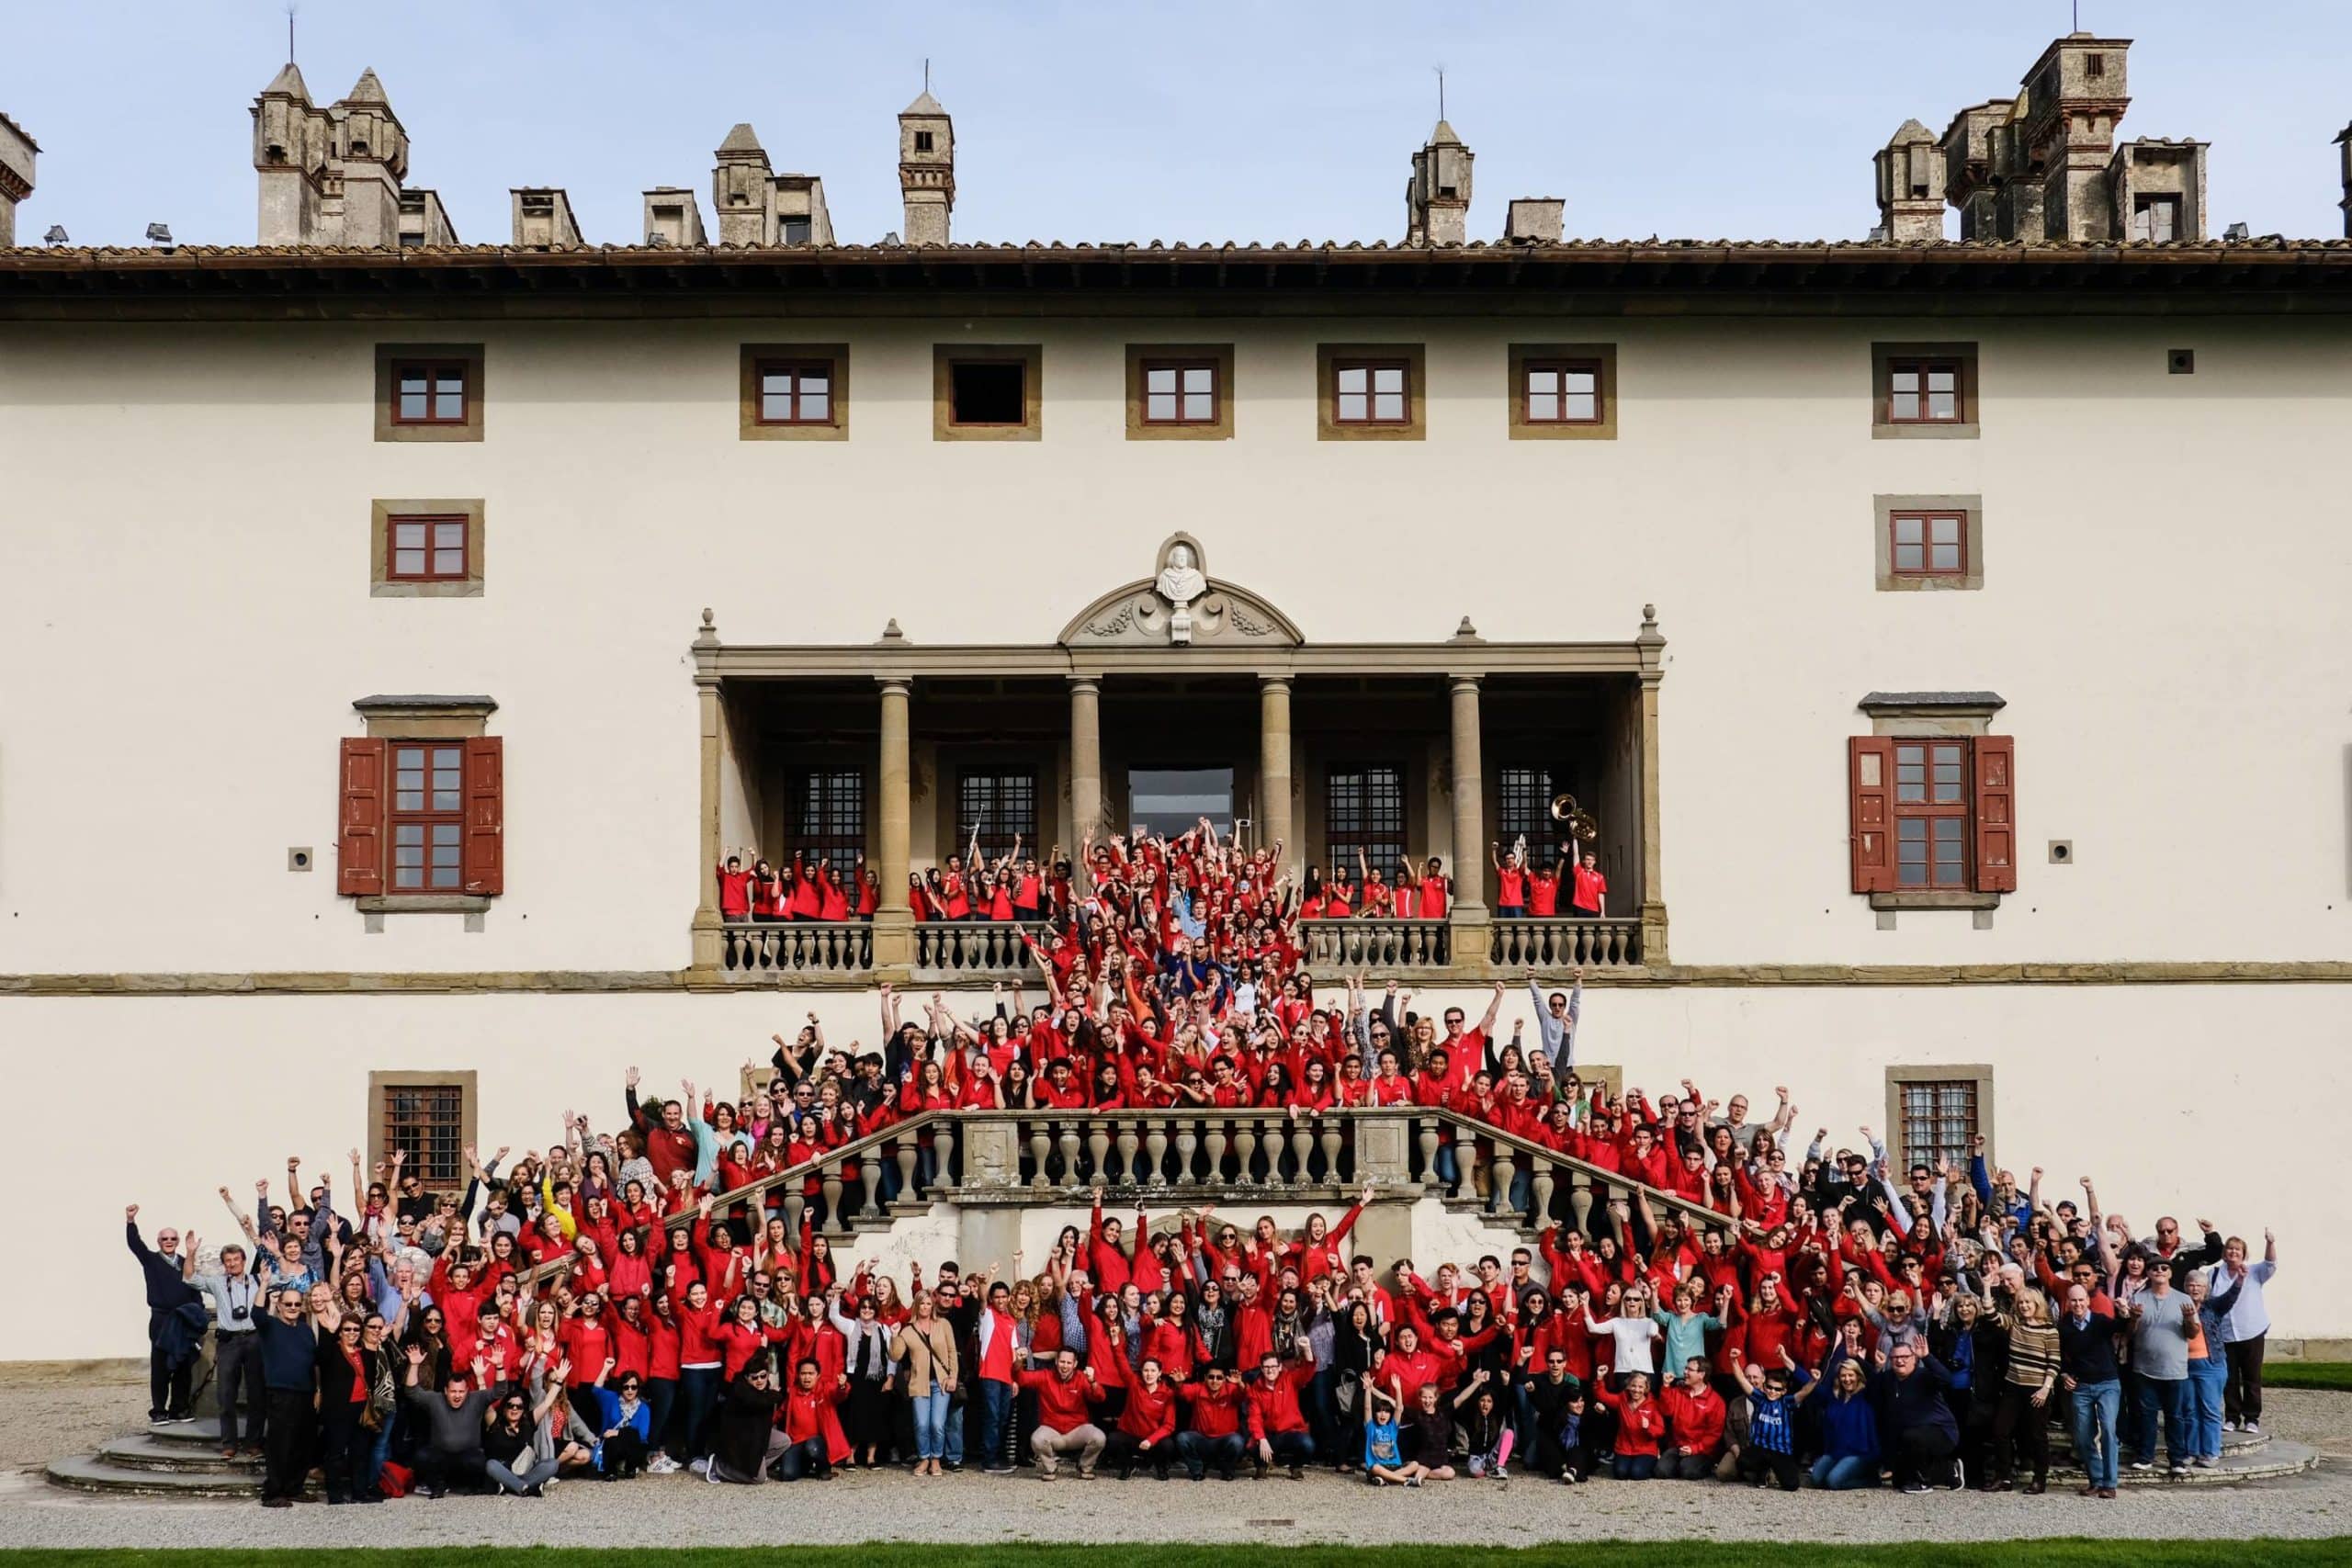 Mater Dei Families in Tuscany Italy with iNSIDE EUROPE 2016 - Group shot in front of the Medici Villa at Artimino by Steve Wylie